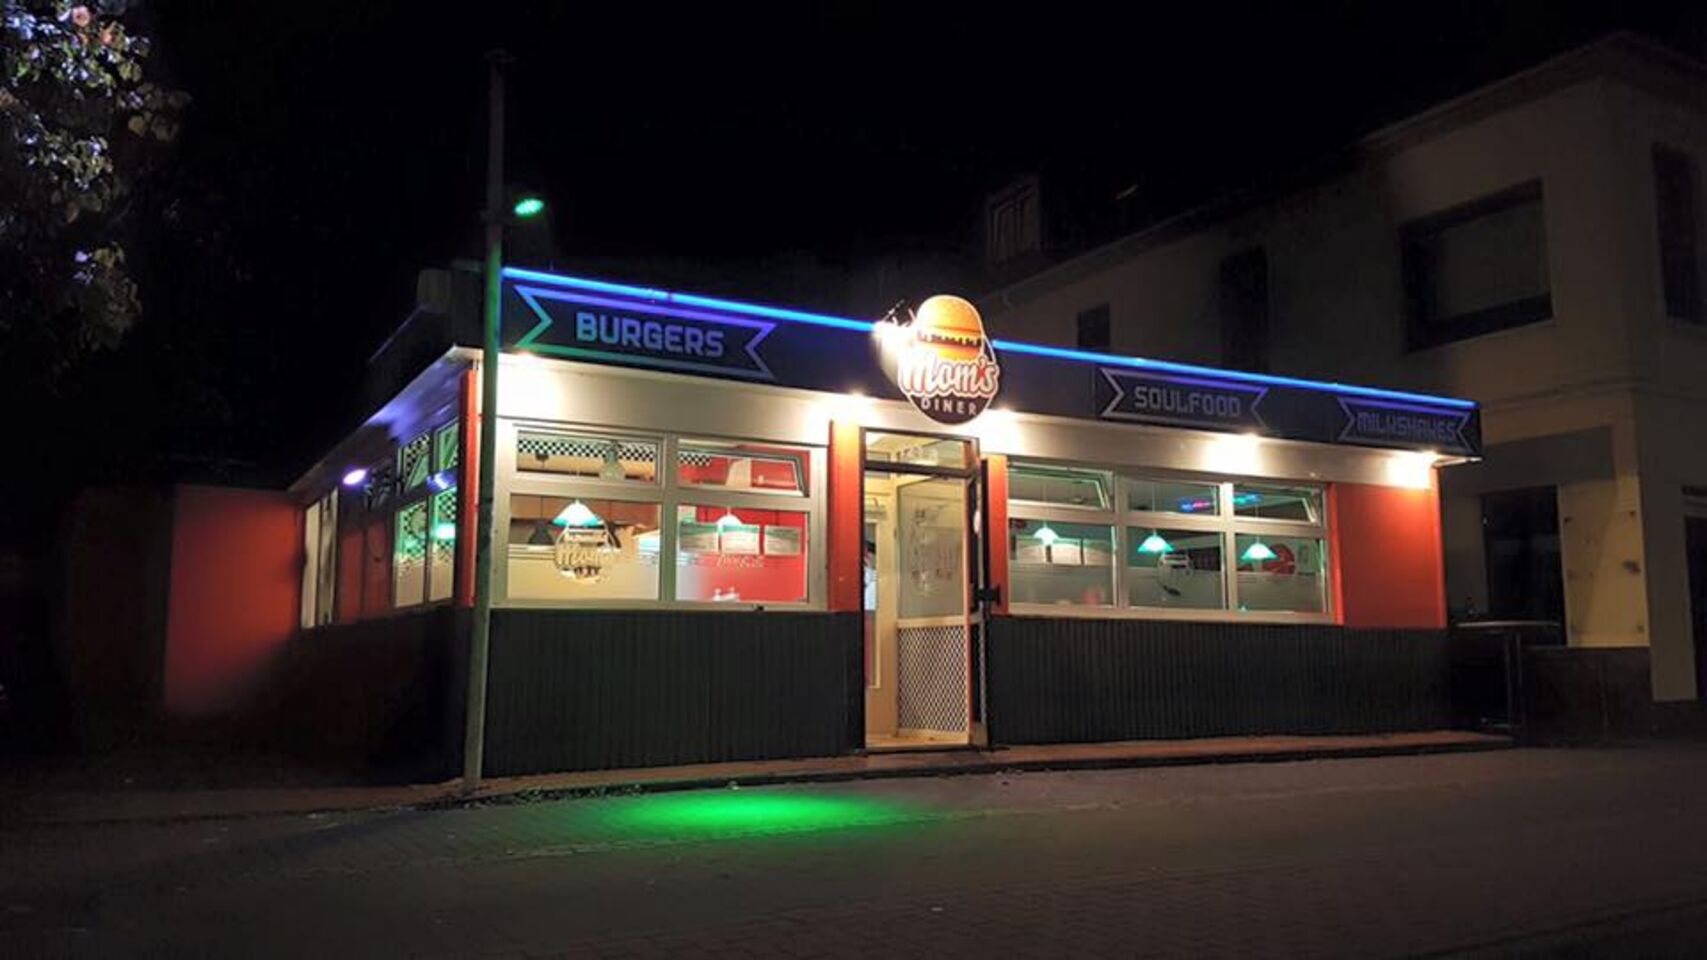 A photo of Mom’s Diner